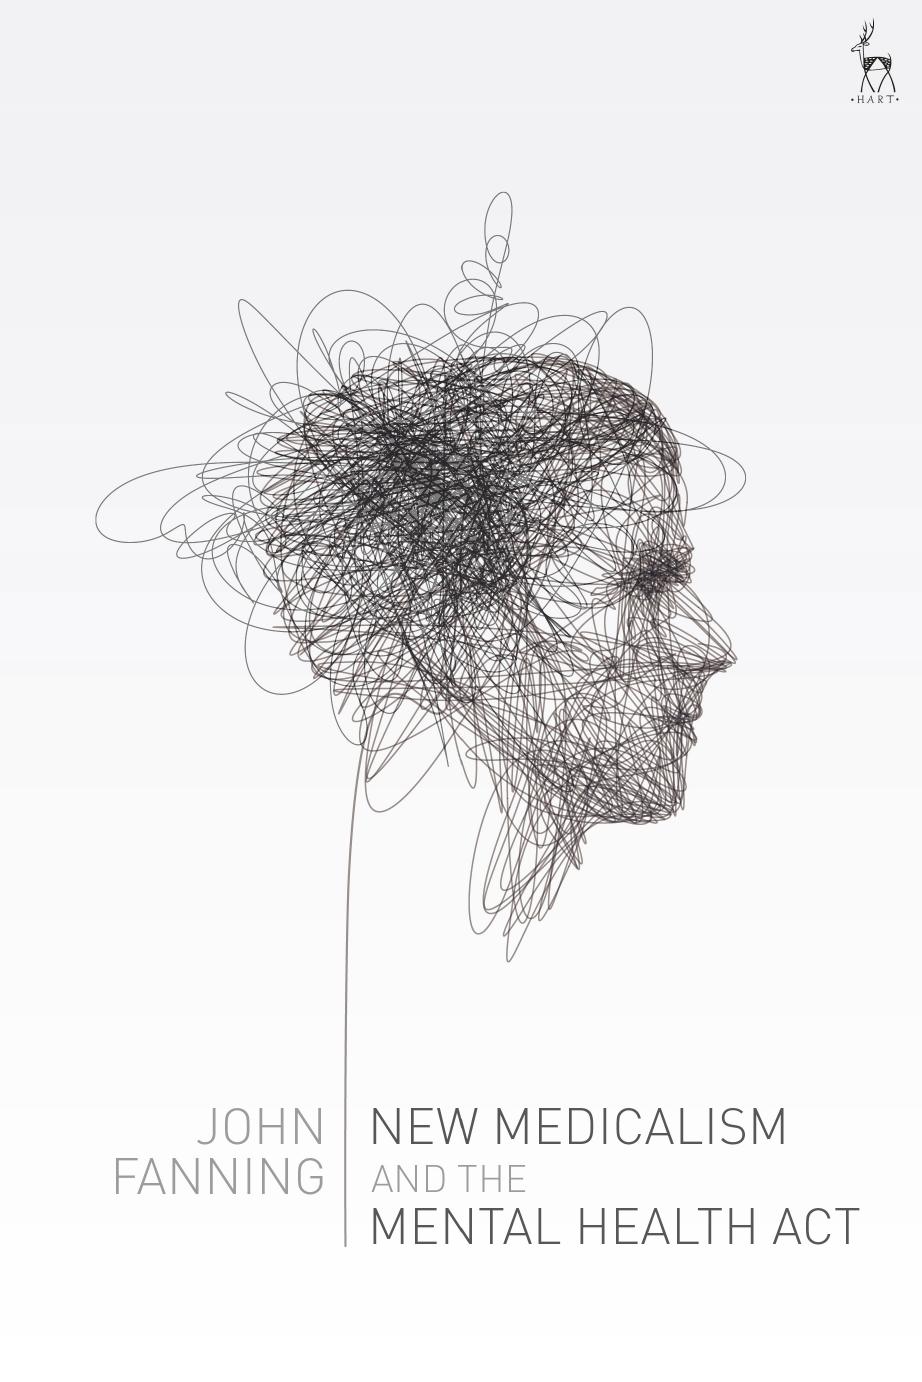 New Medicalism and the Mental Health Act by John Fanning